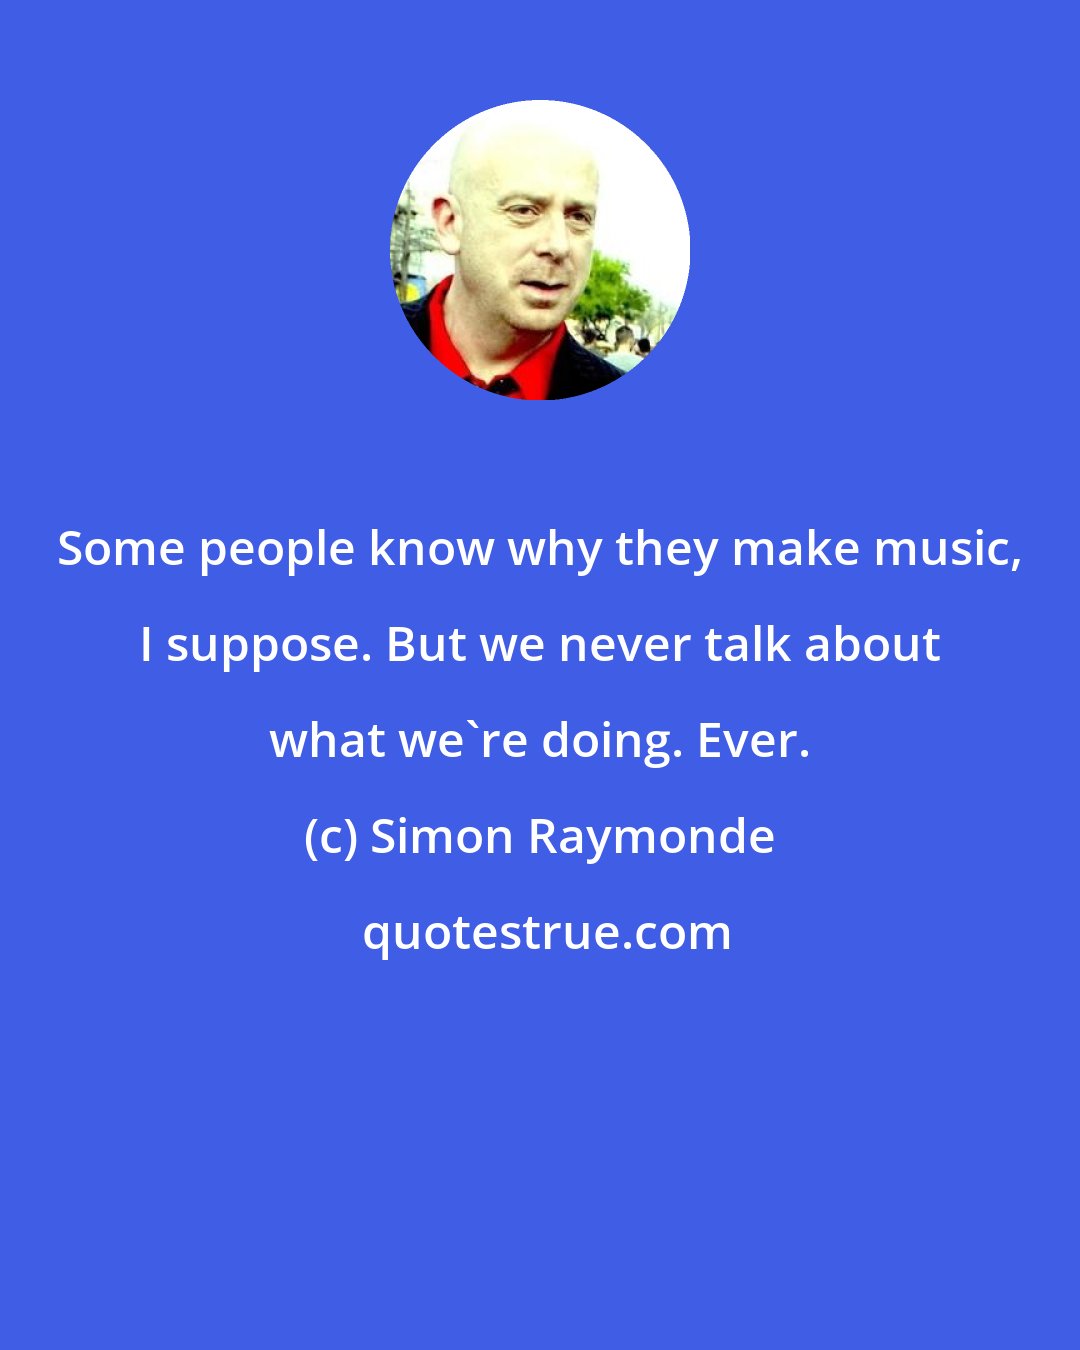 Simon Raymonde: Some people know why they make music, I suppose. But we never talk about what we're doing. Ever.